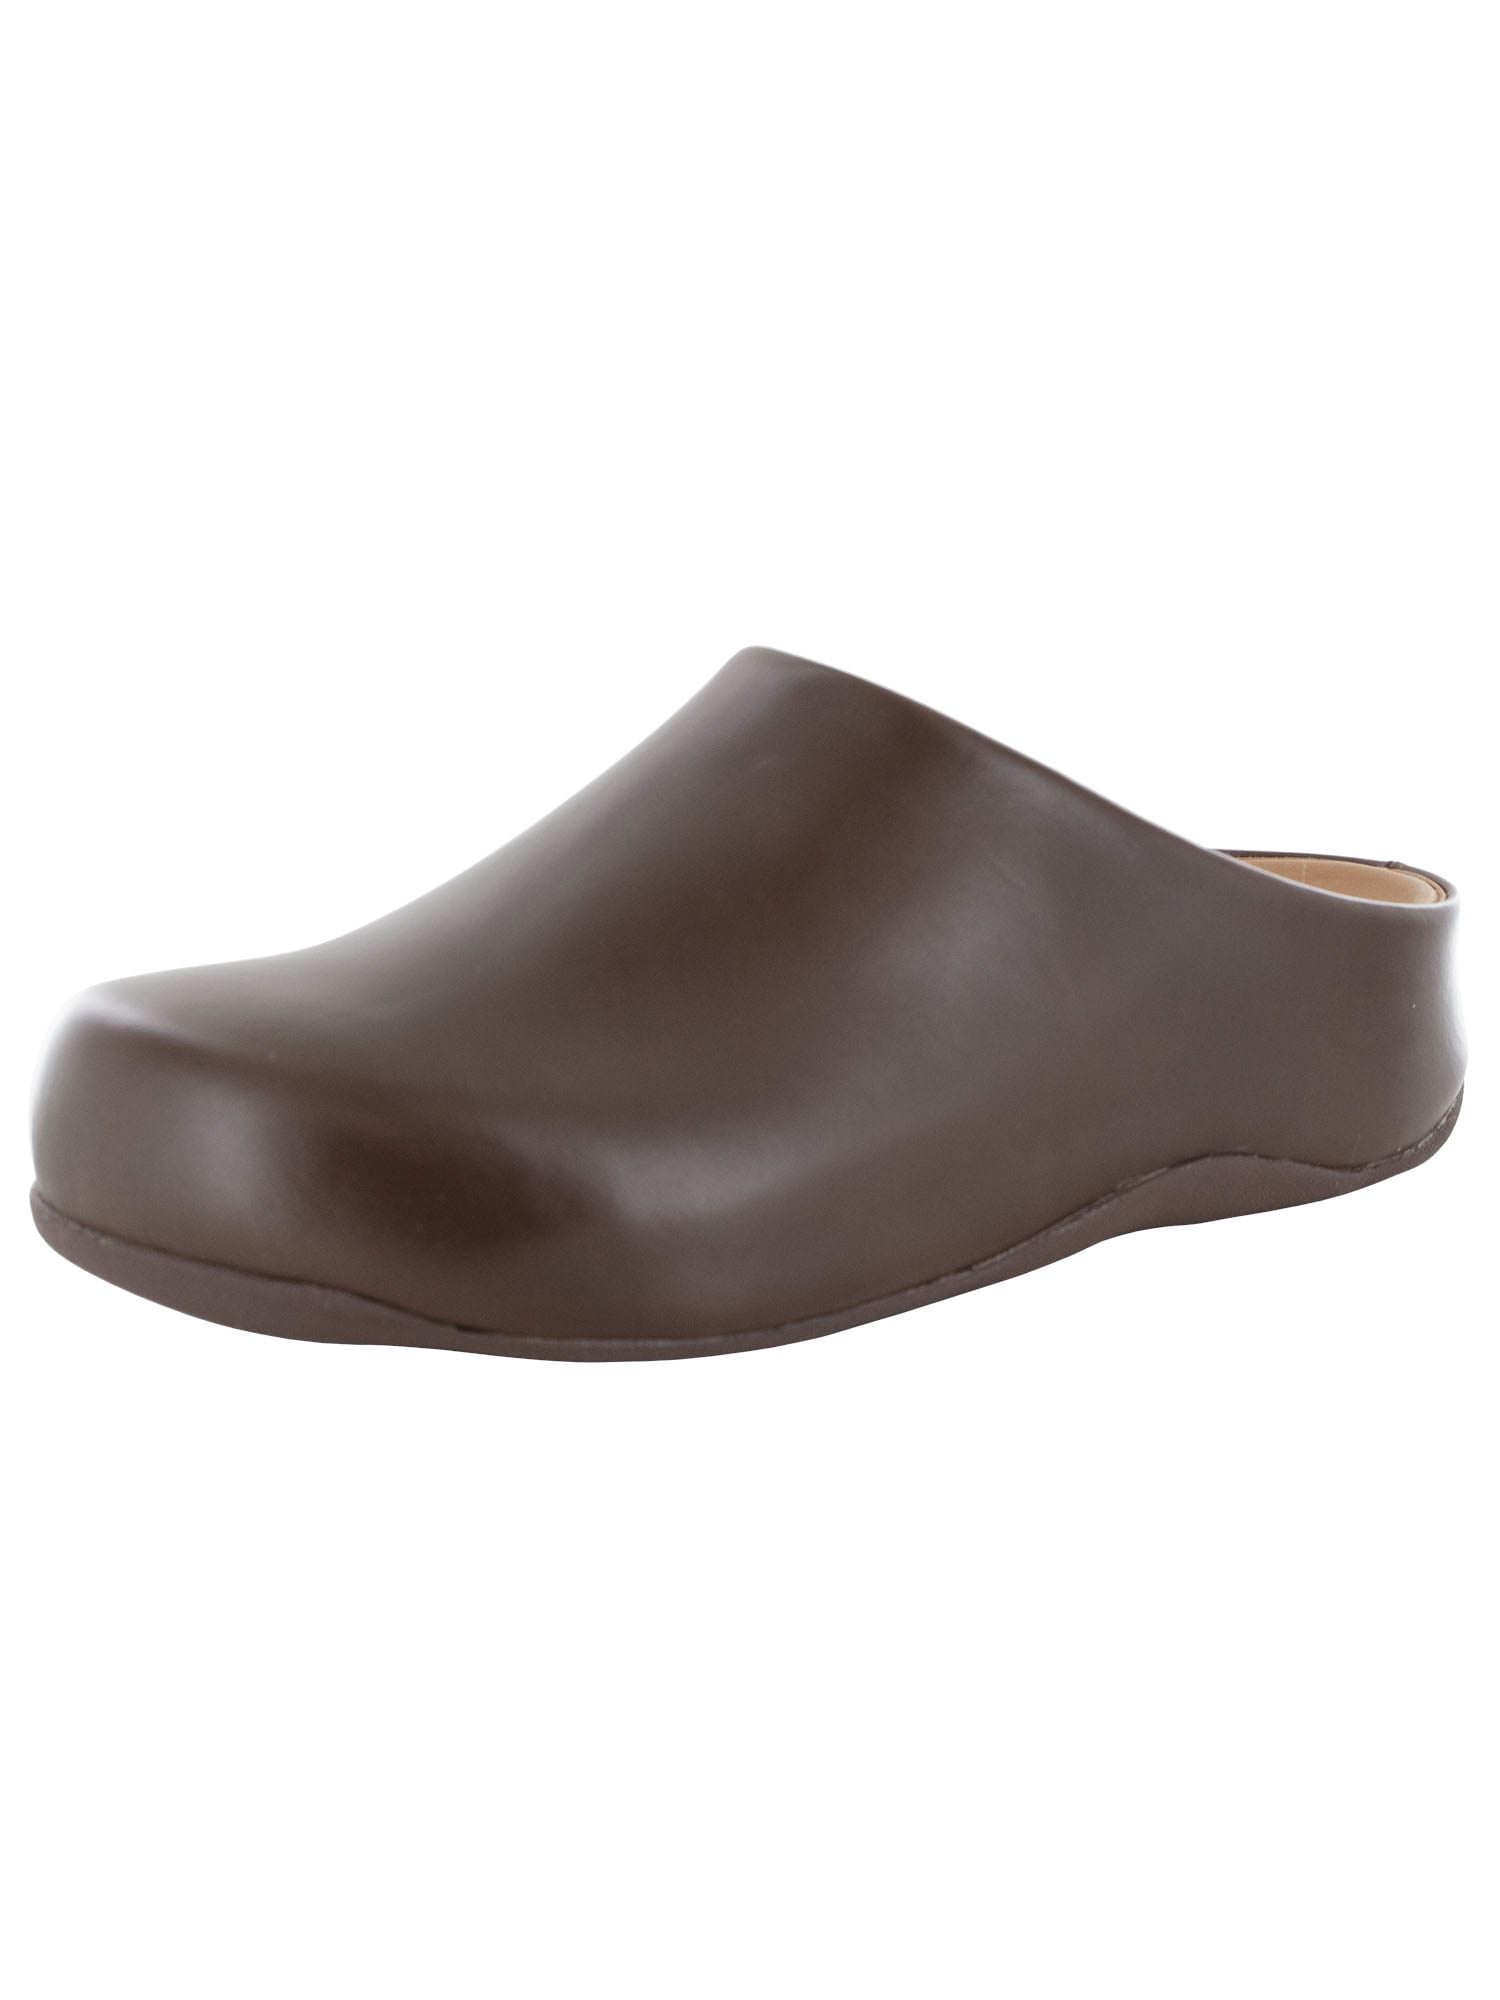 fitflop clogs womens